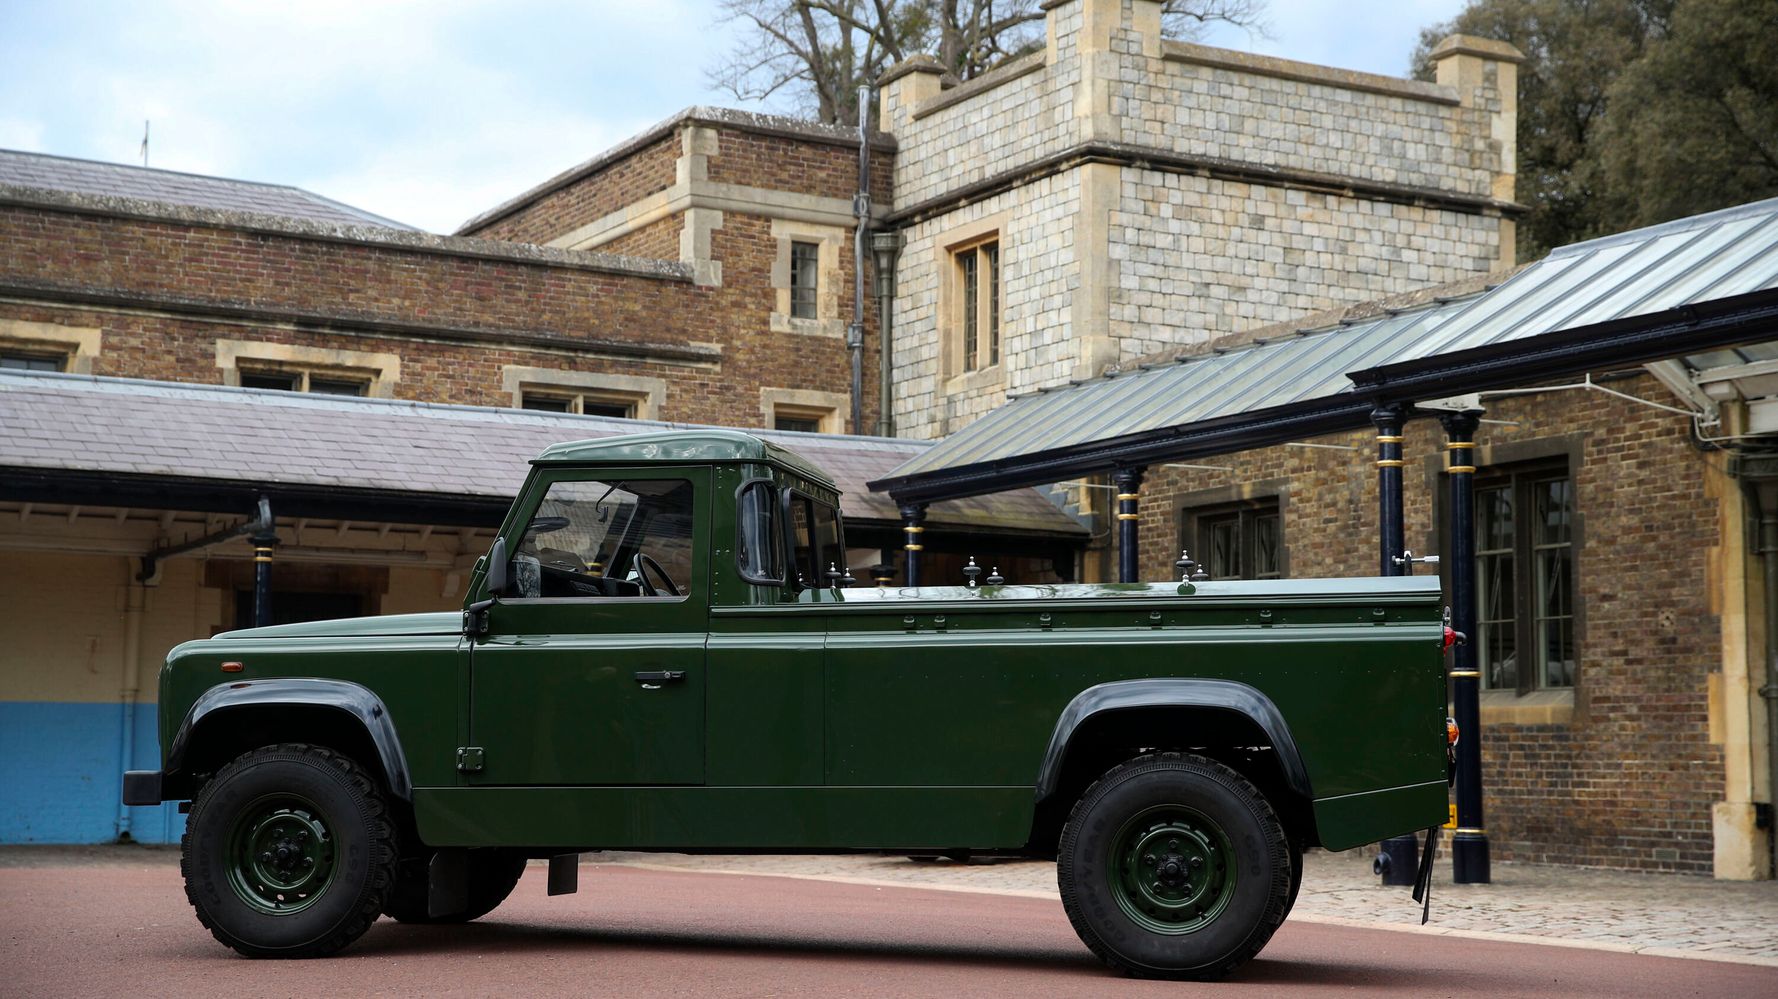 Prince Philip designed his own stroller by modifying the Land Rover